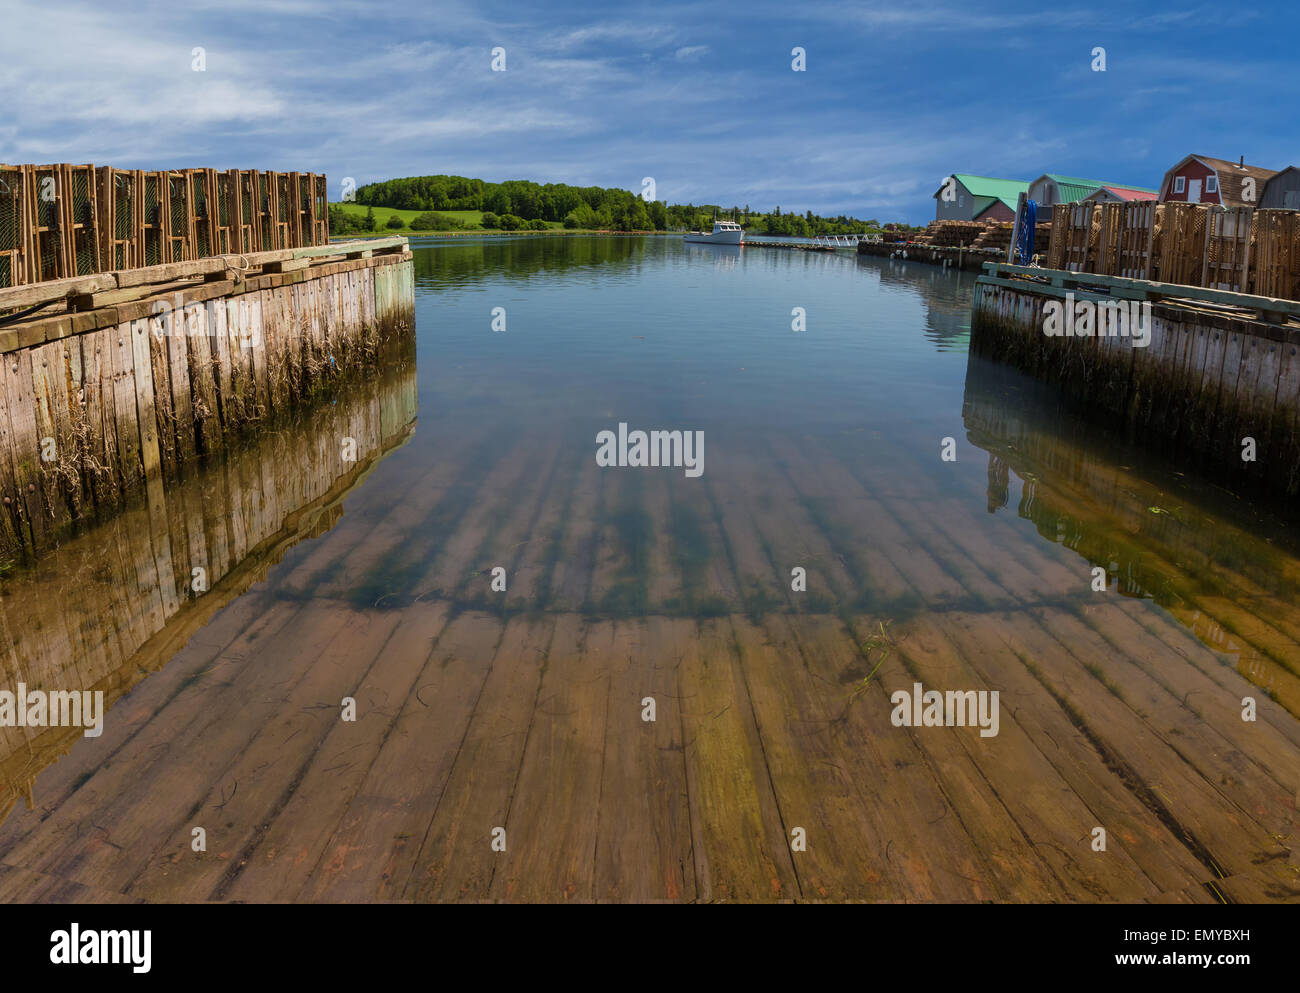 A boat slip at a commercial lobster fishing wharf in rural Prince Edward Island, Canada. Stock Photo